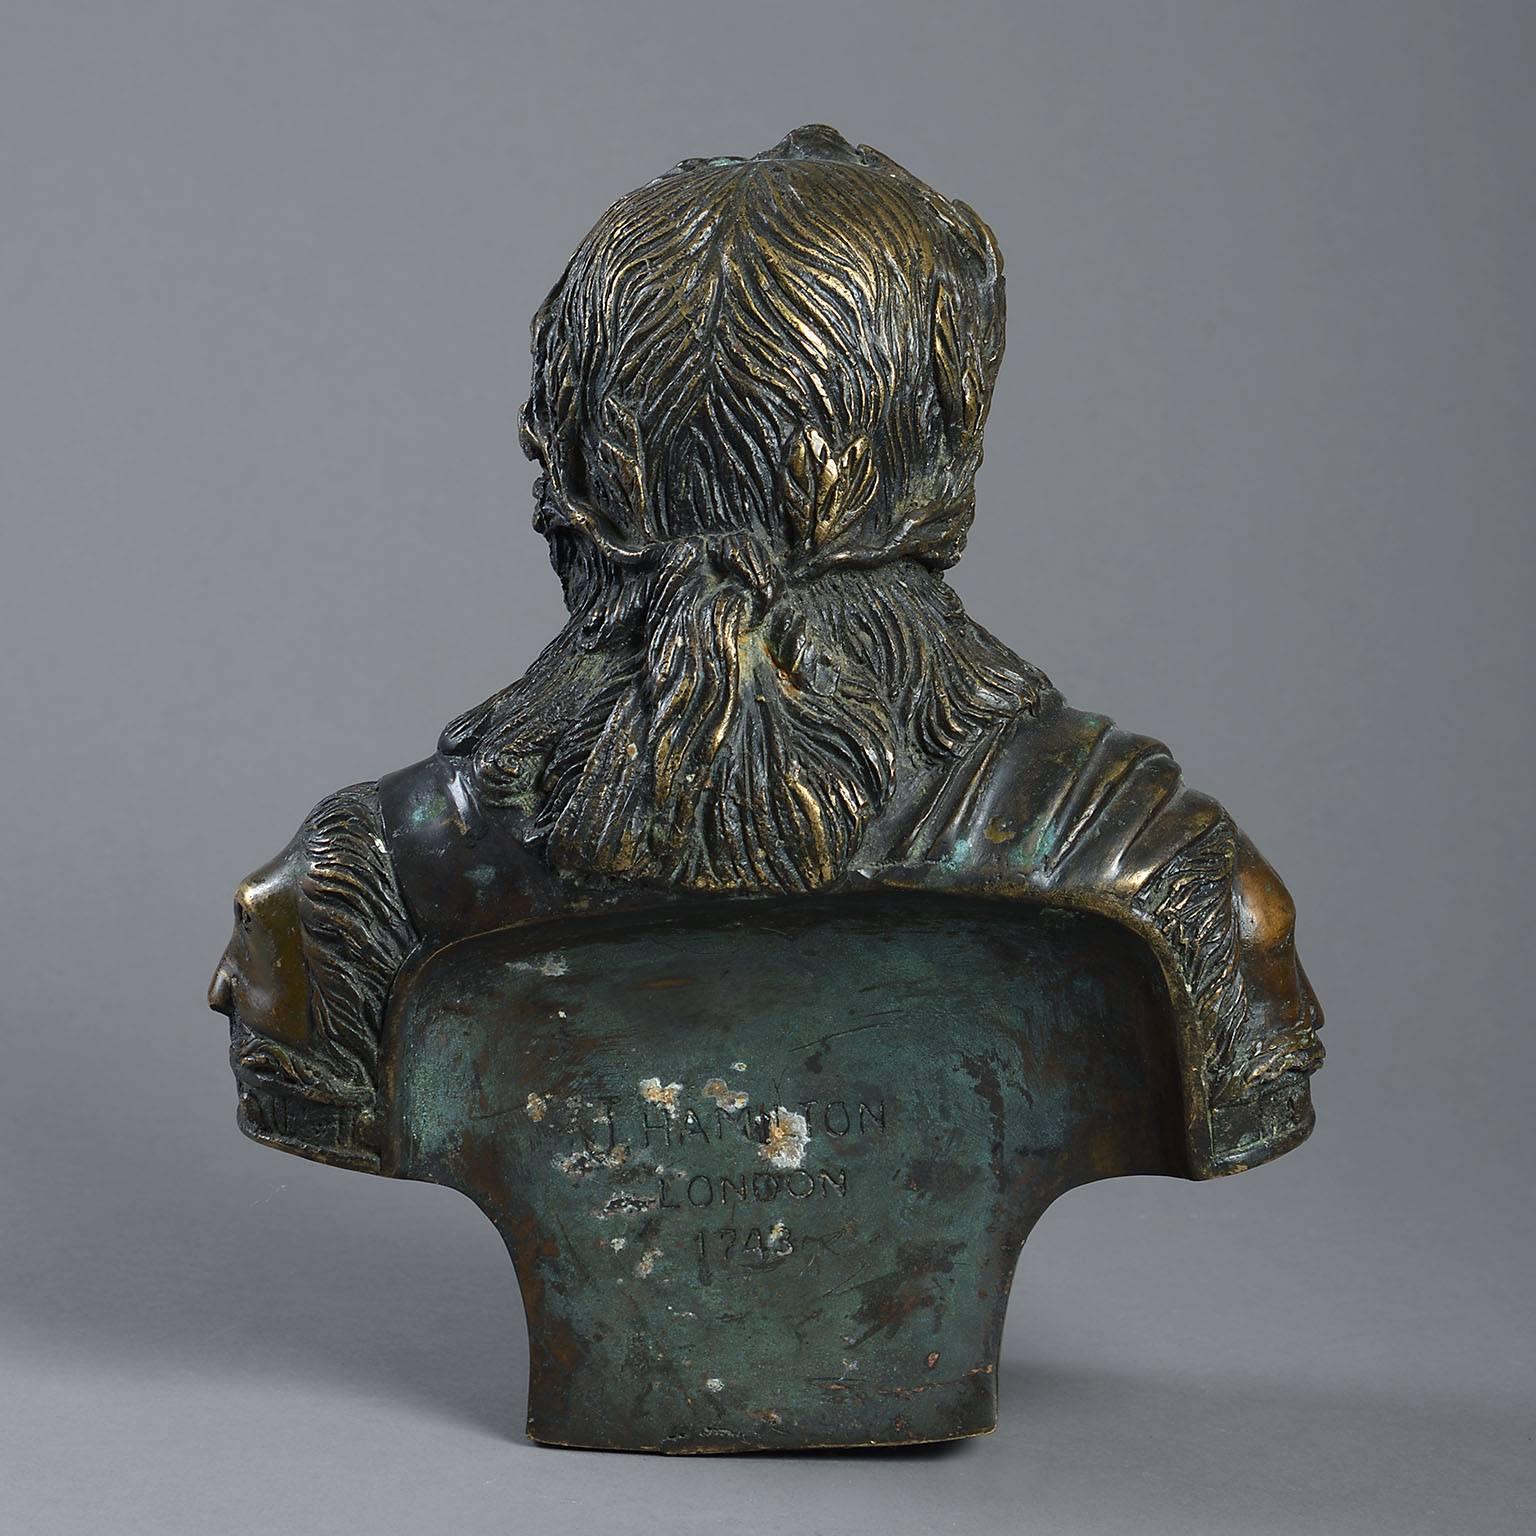 Bronze bust of George II
signed J. Hamilton, London, 1743. George II reigned from 1727 until his death in 1760. A bust by Rysbrack of the King, now in the Victoria & Albert Museum, shows him in similar victor's garb, probably after the battle of